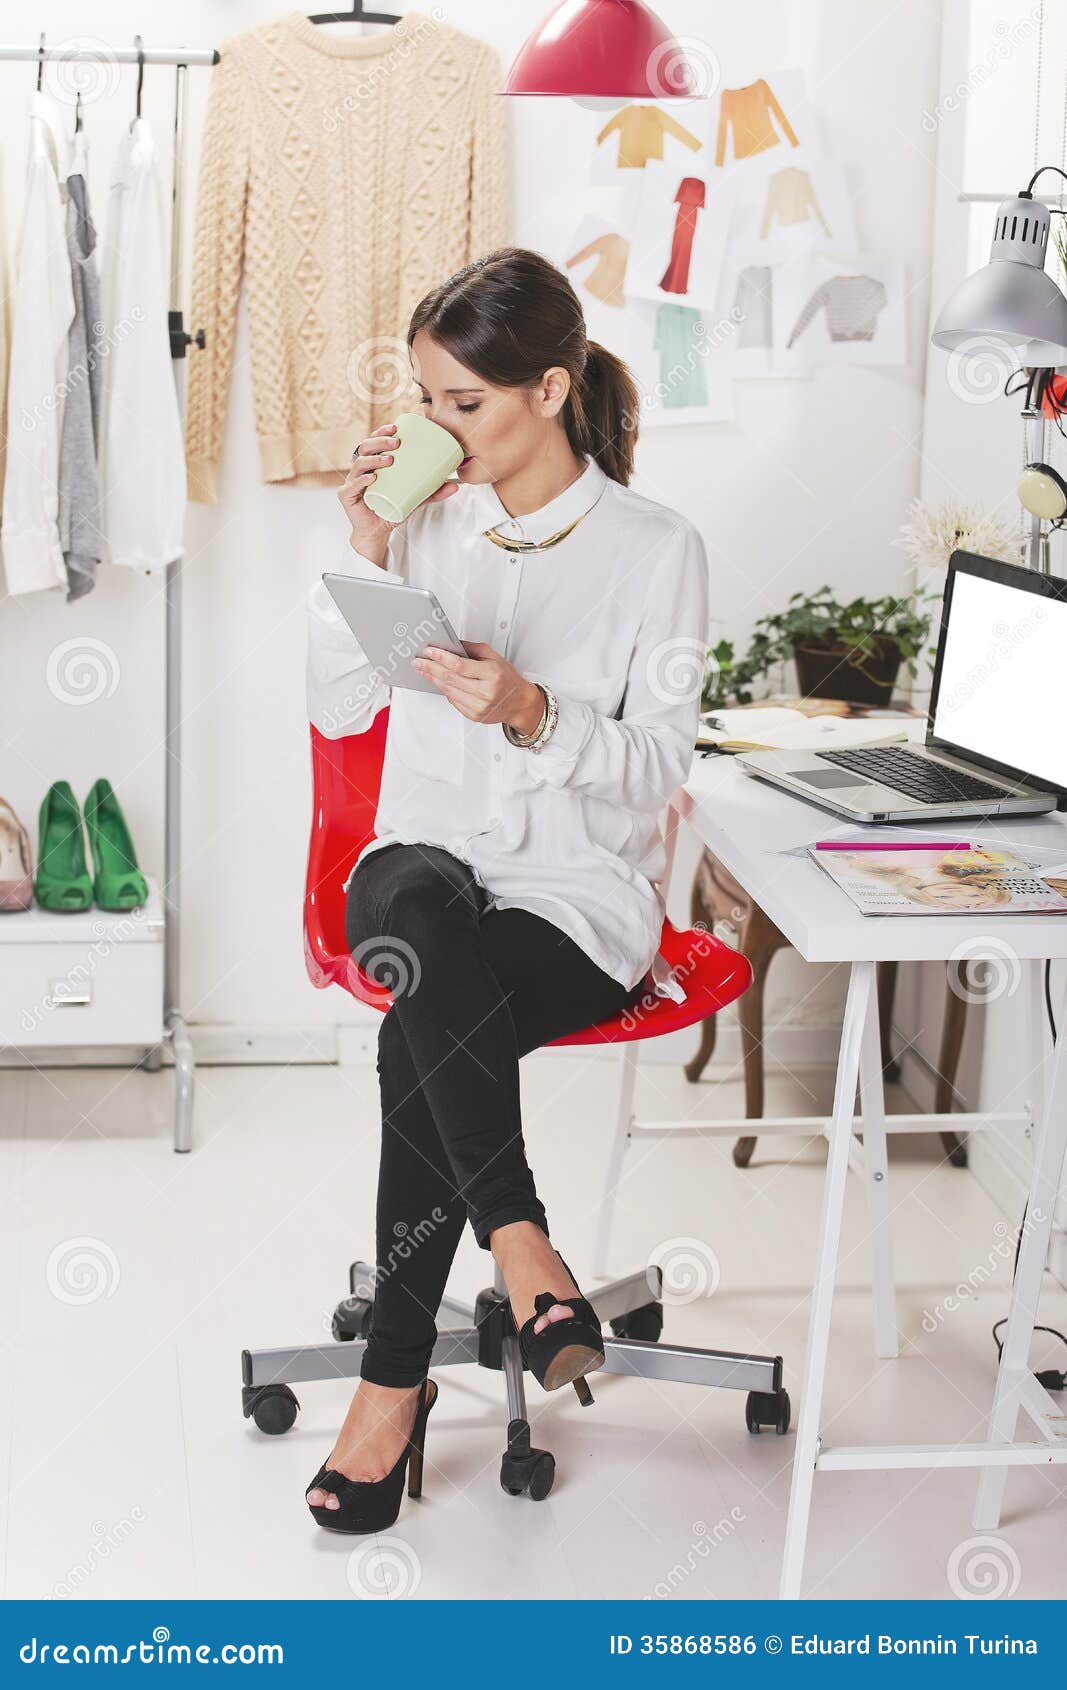 Fashion Woman Blogger Working In A Creative Workspace With ...